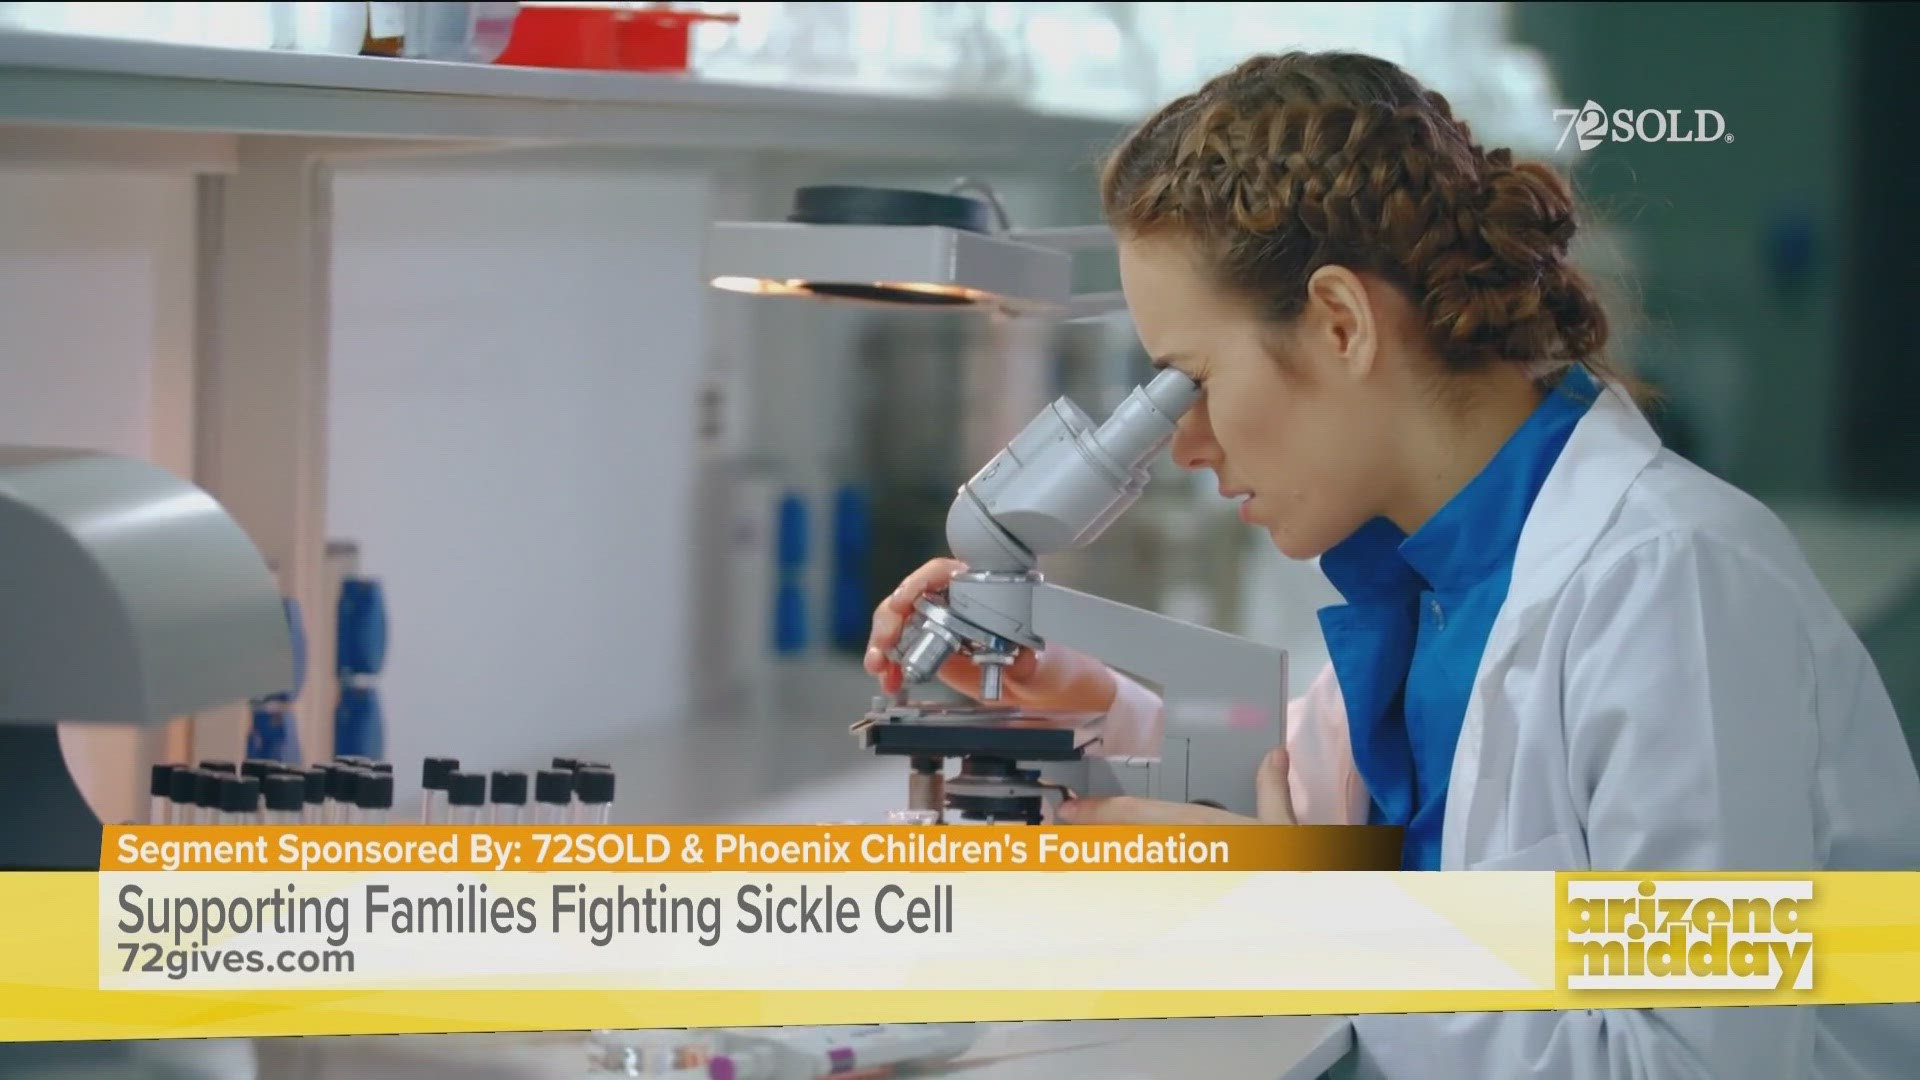 Destry learns more about Sickle Cell from Dr. Sanjay Shah of Phoenix Children's Hospital. Find out how 72Sold is helping raise funds and awareness of the disease.